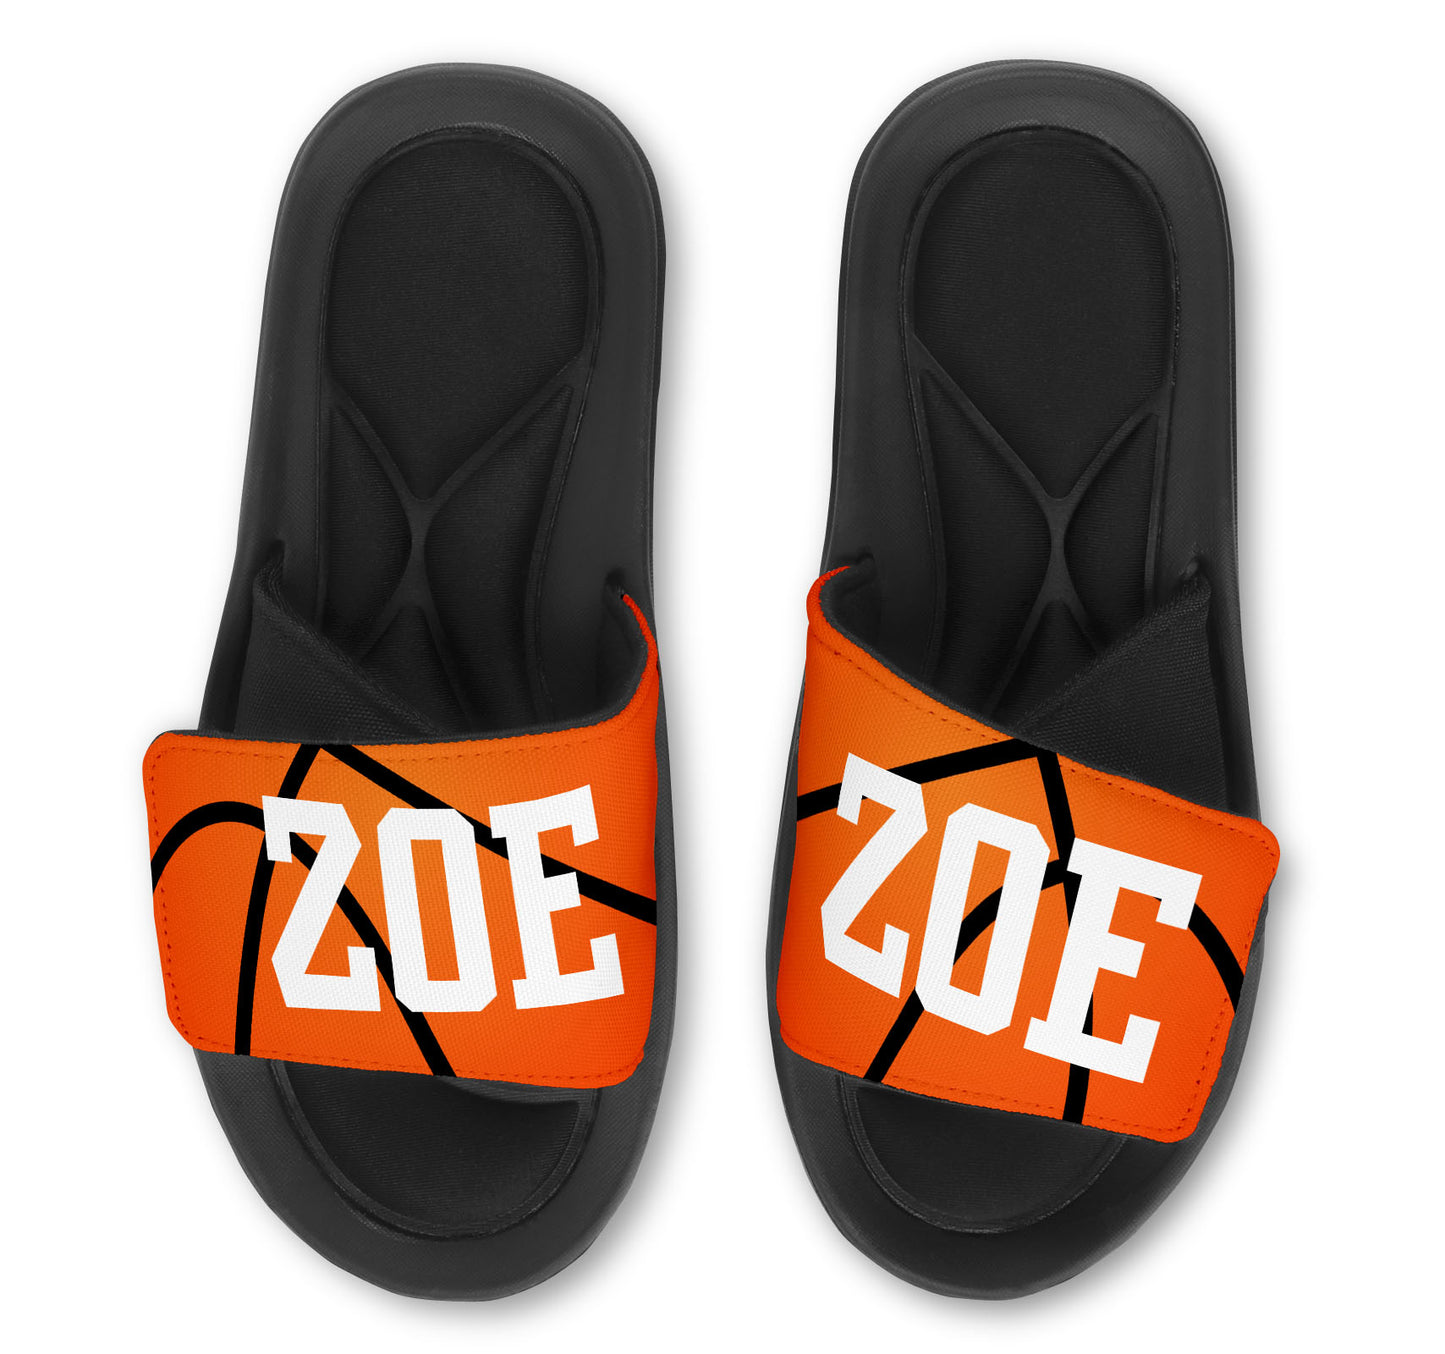 BASKETBALL Slides (Faux Basketball) - Customize with Your Name and/or Number